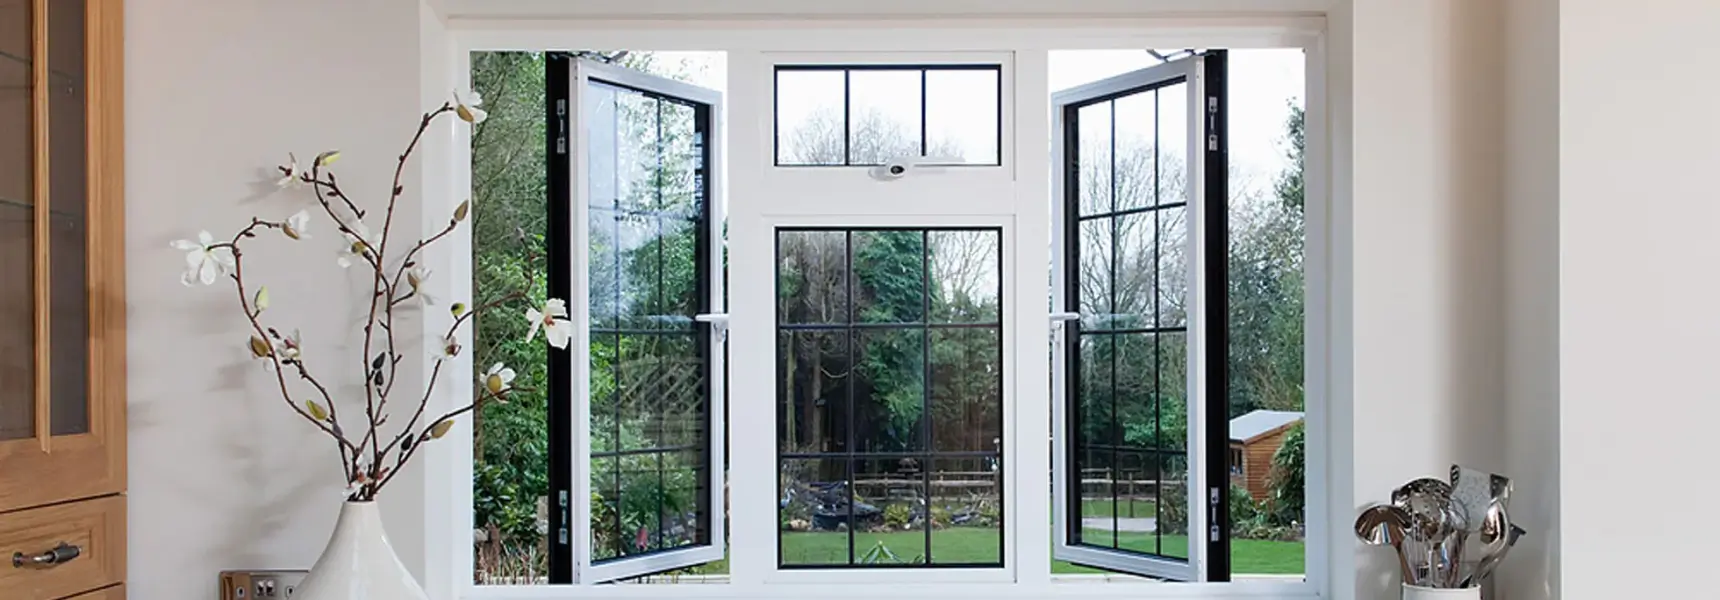 Aluminium Doors and Windows Ultimate Guide For Every Architectural Project